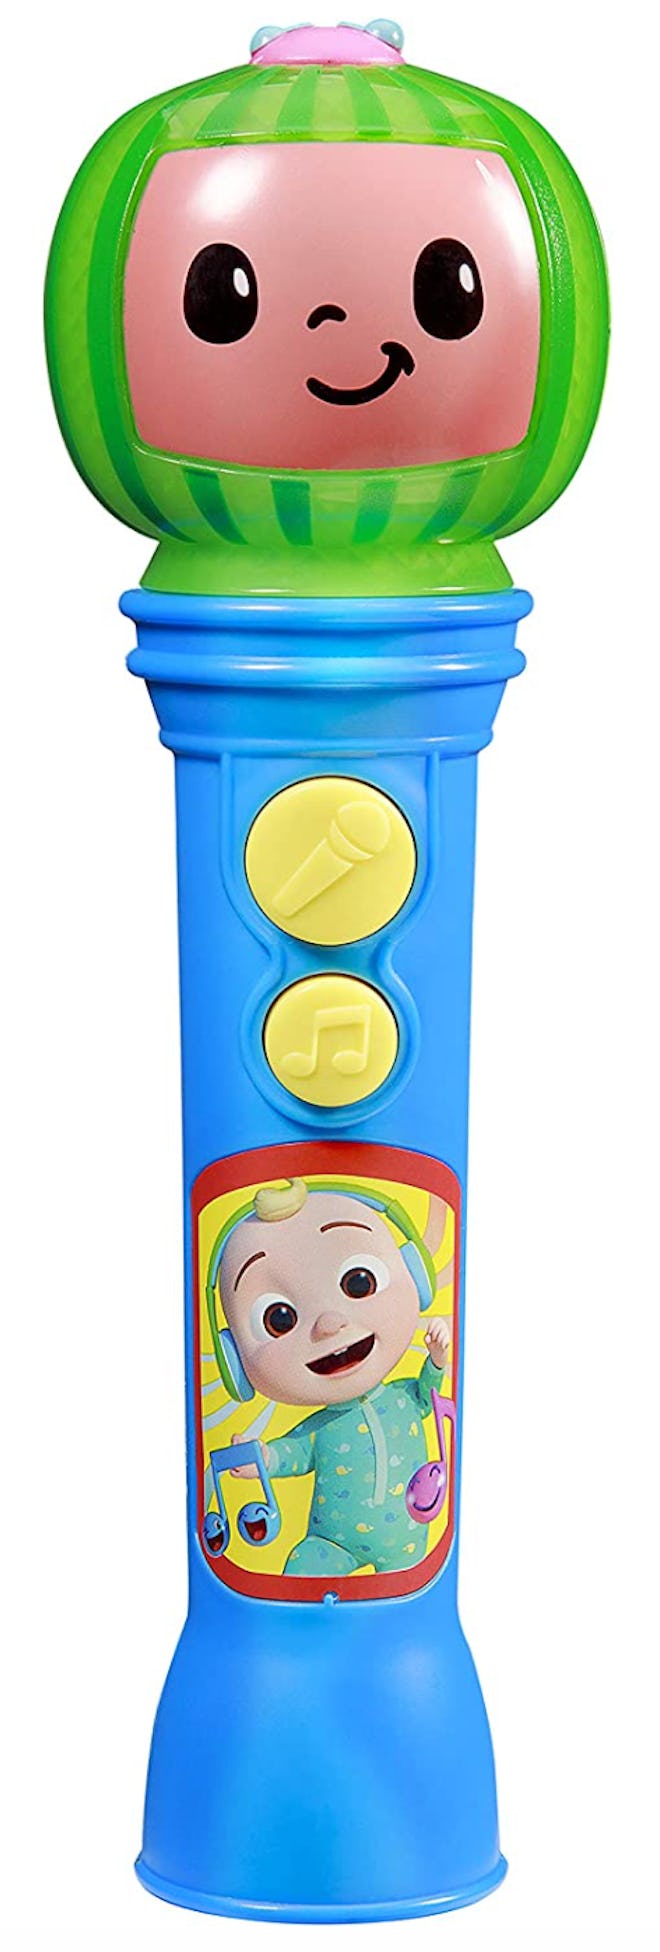 This Cocomelon Toy Microphone is one of the best gifts for 2-year-olds.